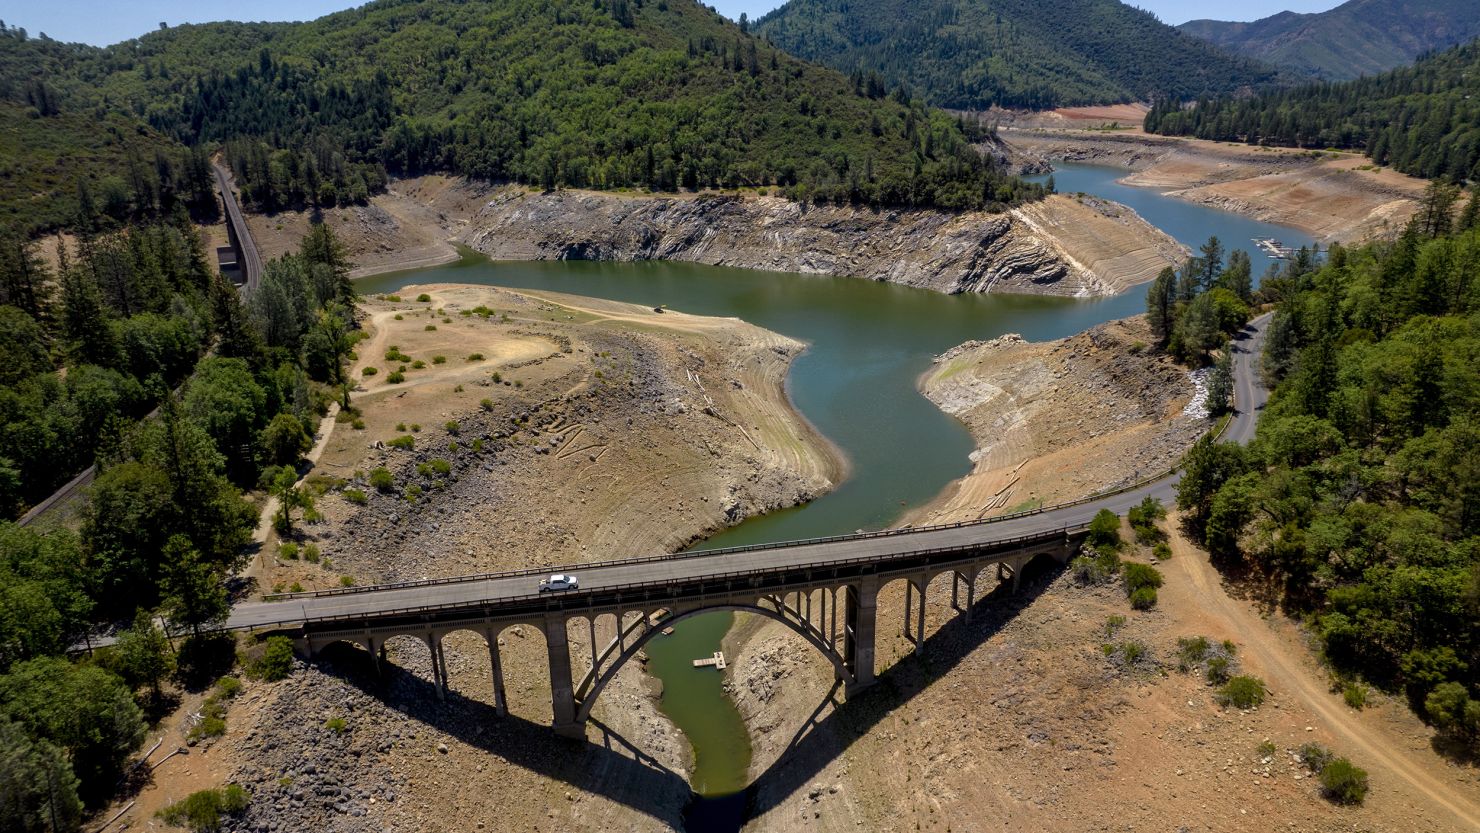 A tributary of the Sacramento River flows into Shasta Lake during a drought in Shasta-Trinity National Forest in California.